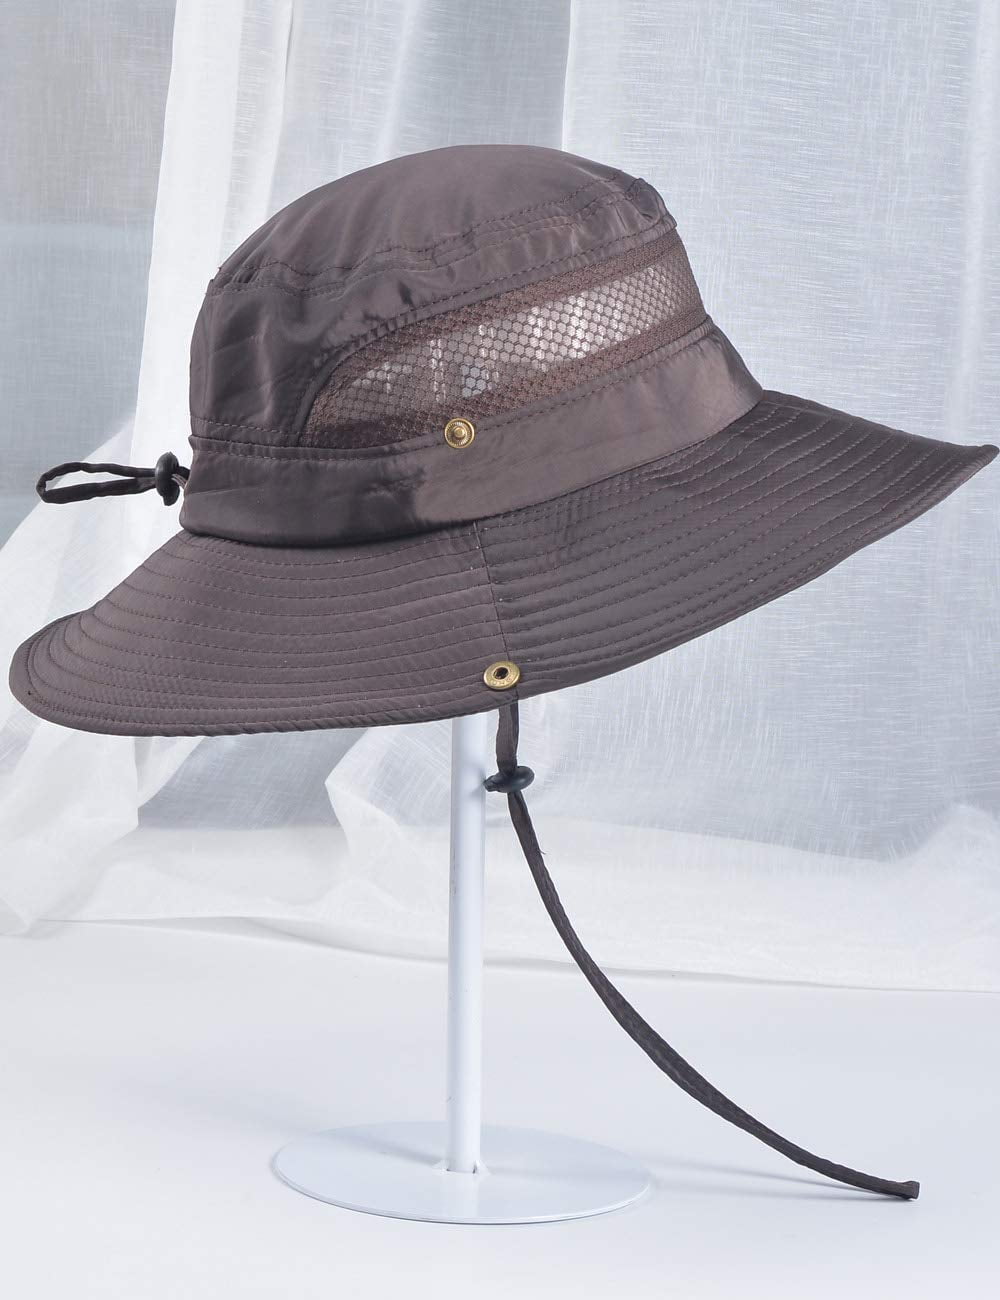 Sun Hat w/ 2 Fans Wide Brim Fishing Hats For Men and Women UV Protection  I6G1